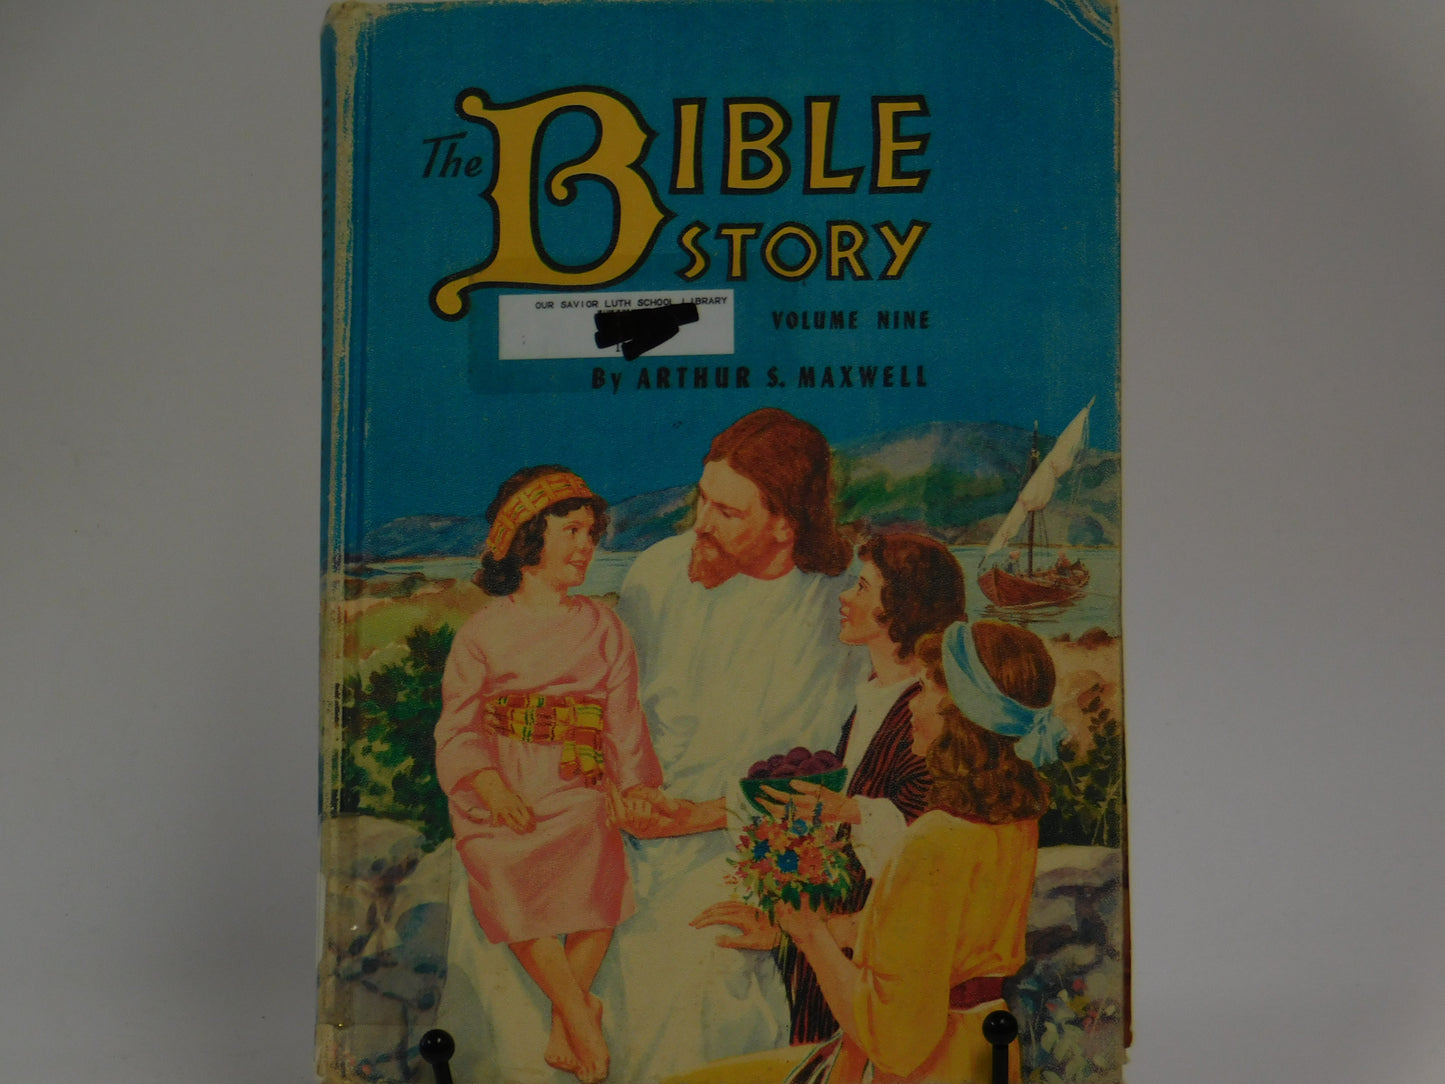 The Bible Story Volume Nine by Arthur S. Maxwell